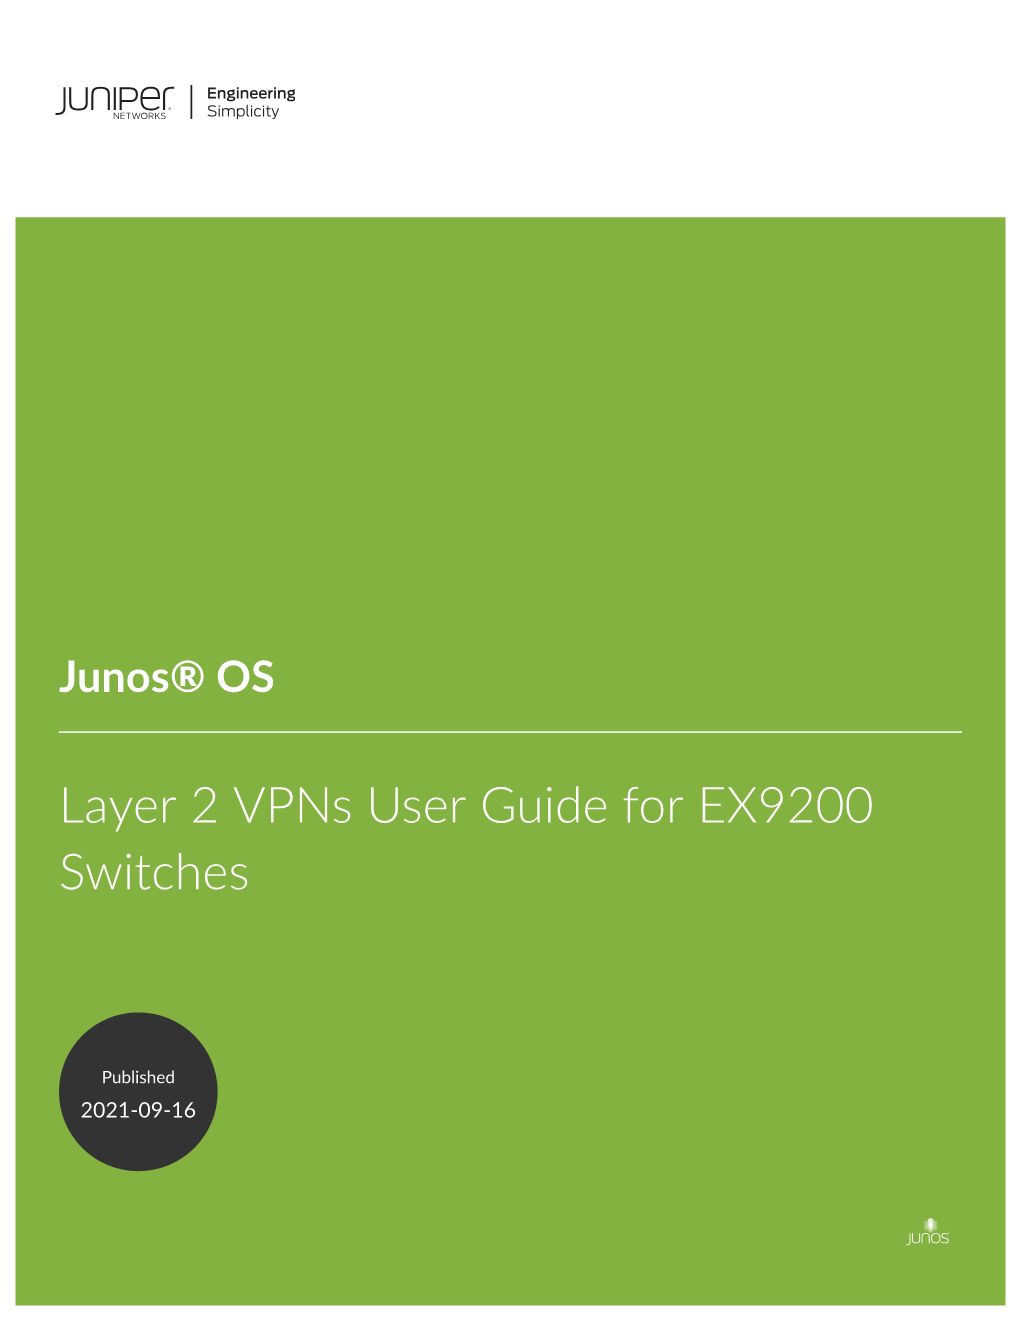 Junos® OS Layer 2 Vpns User Guide for EX9200 Switches Copyright © 2021 Juniper Networks, Inc